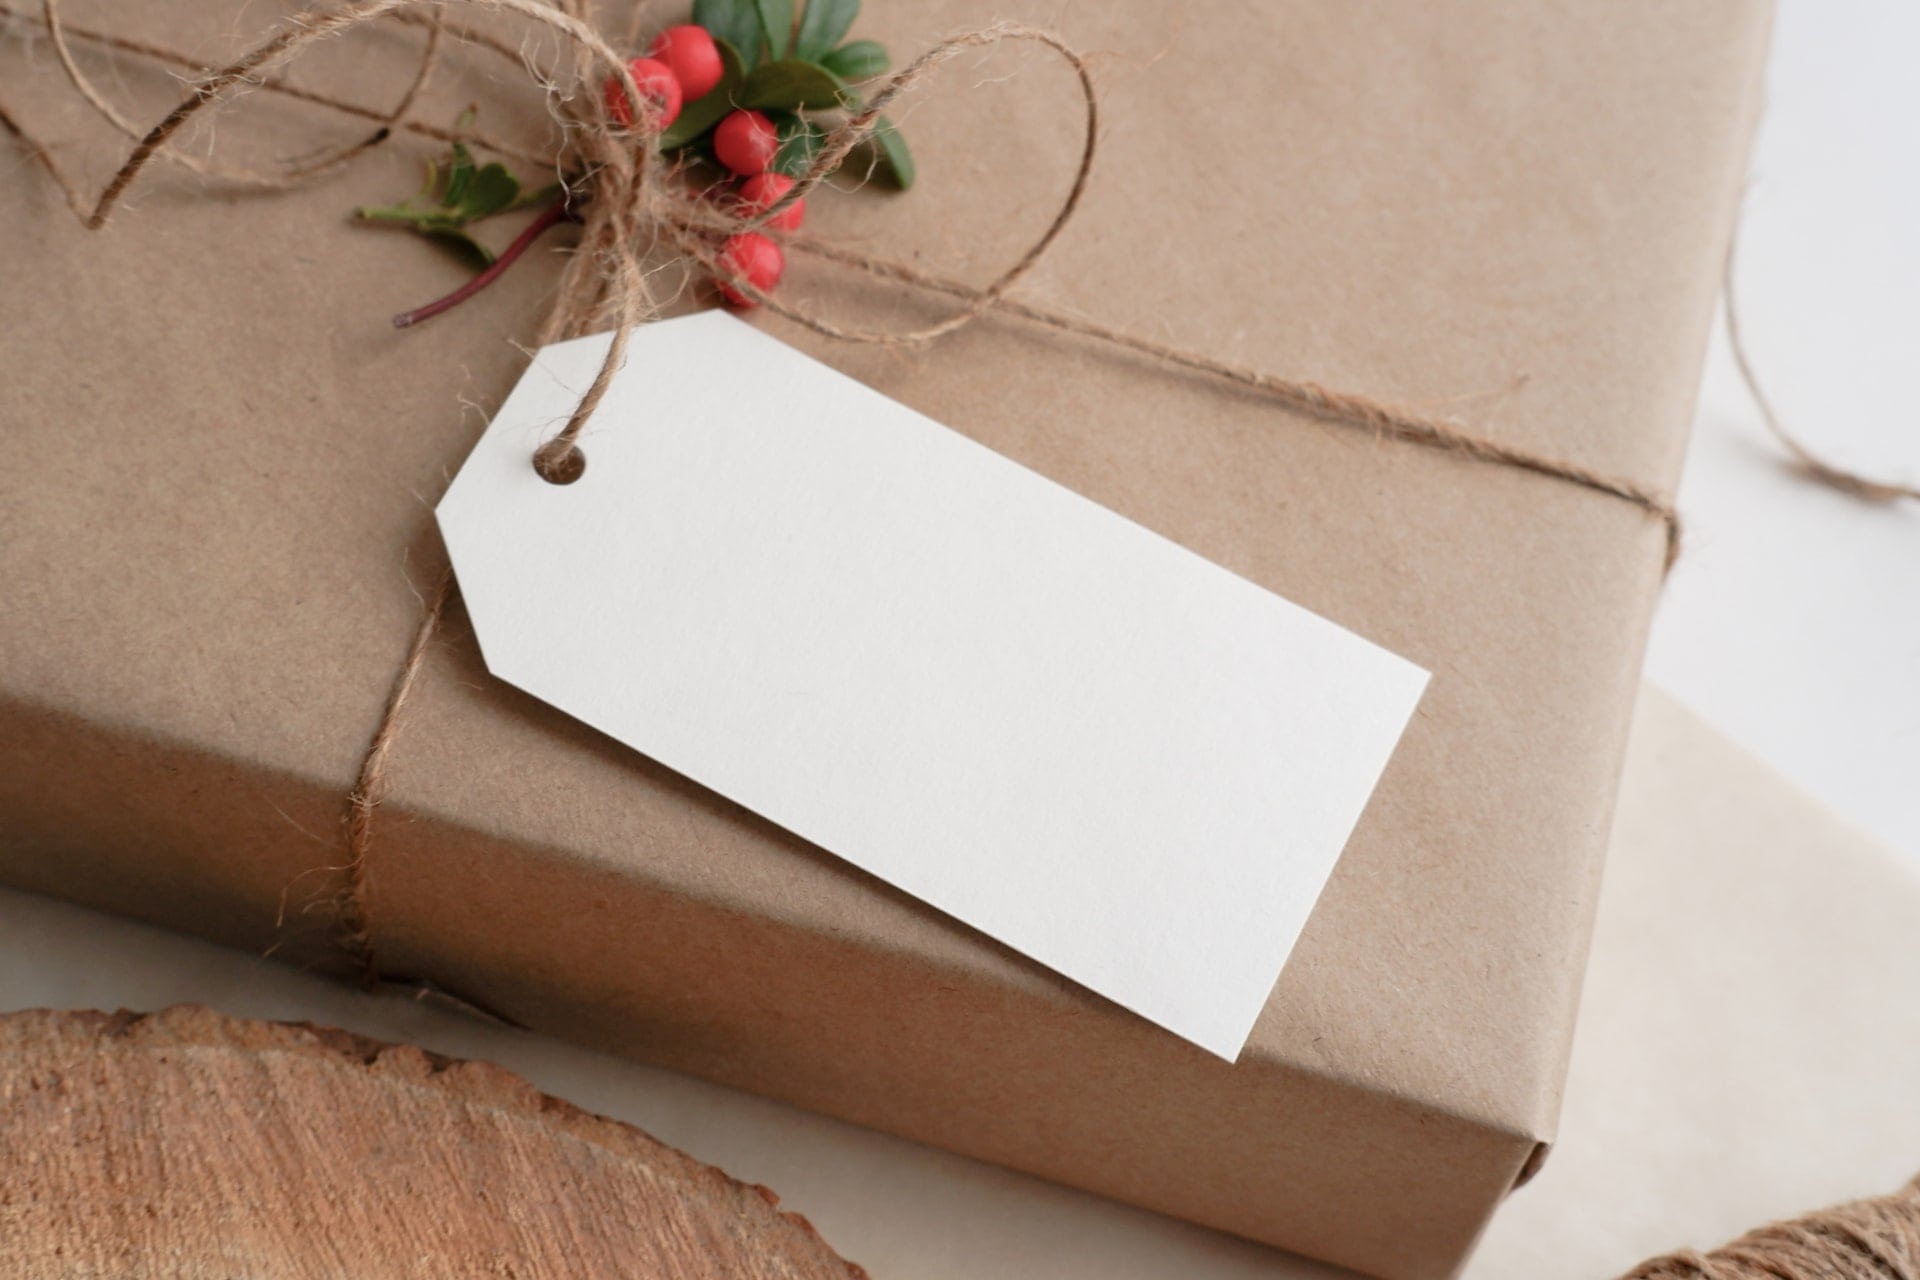 Ideas for eco-friendly gift wrapping – use what you have at home!